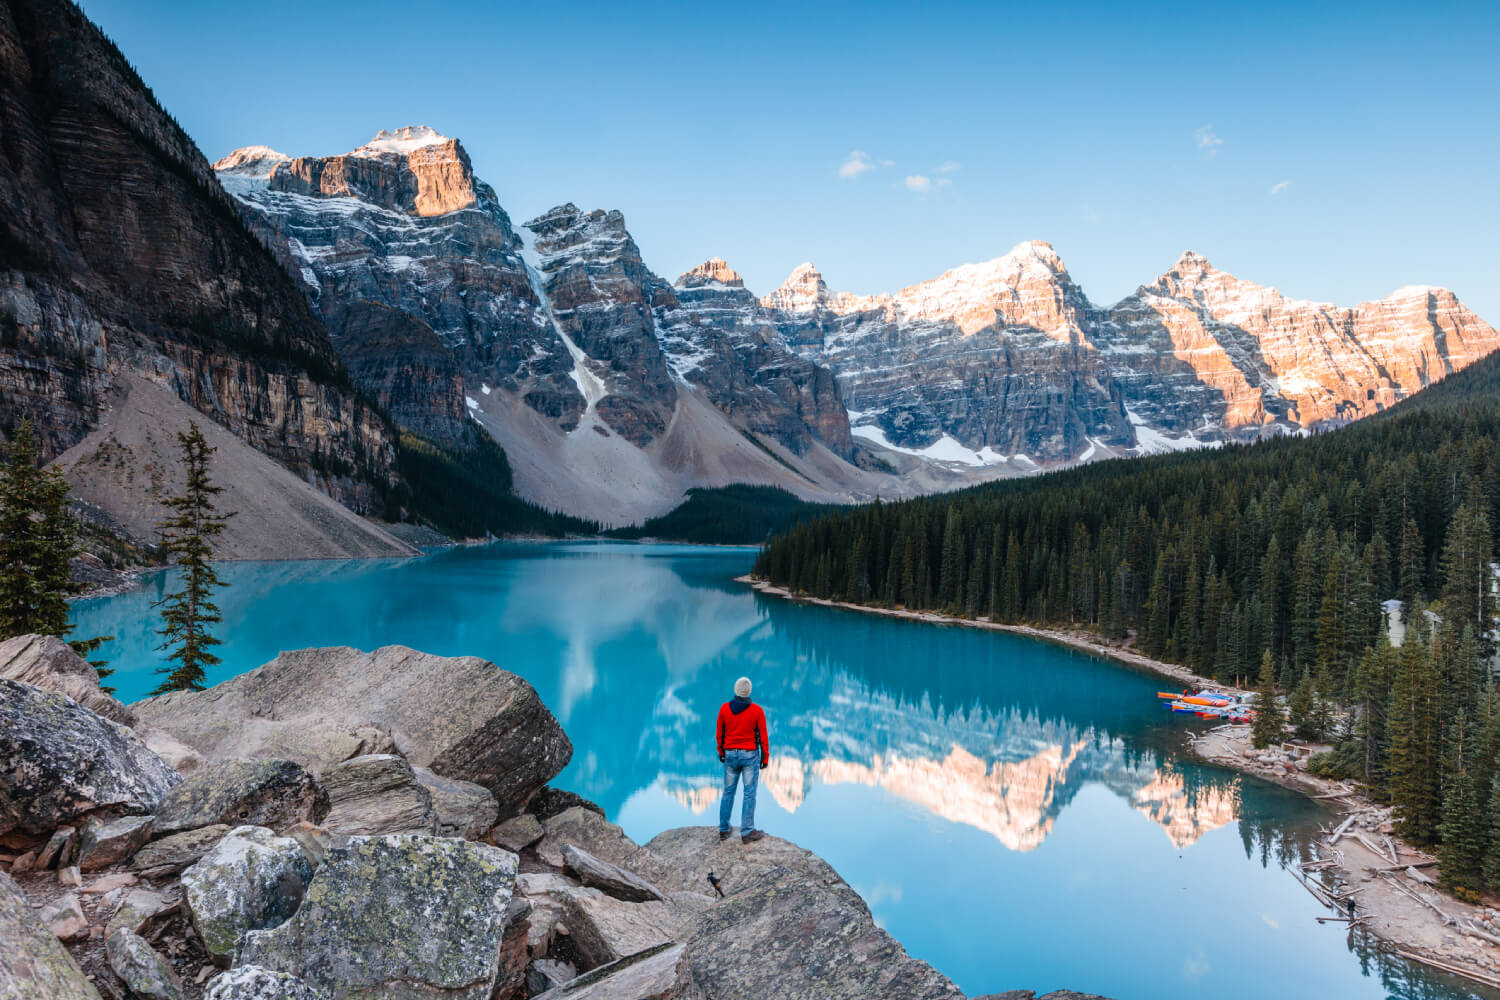 a man looking at the Moraine lake in Banff National Park, Alberta, Canada